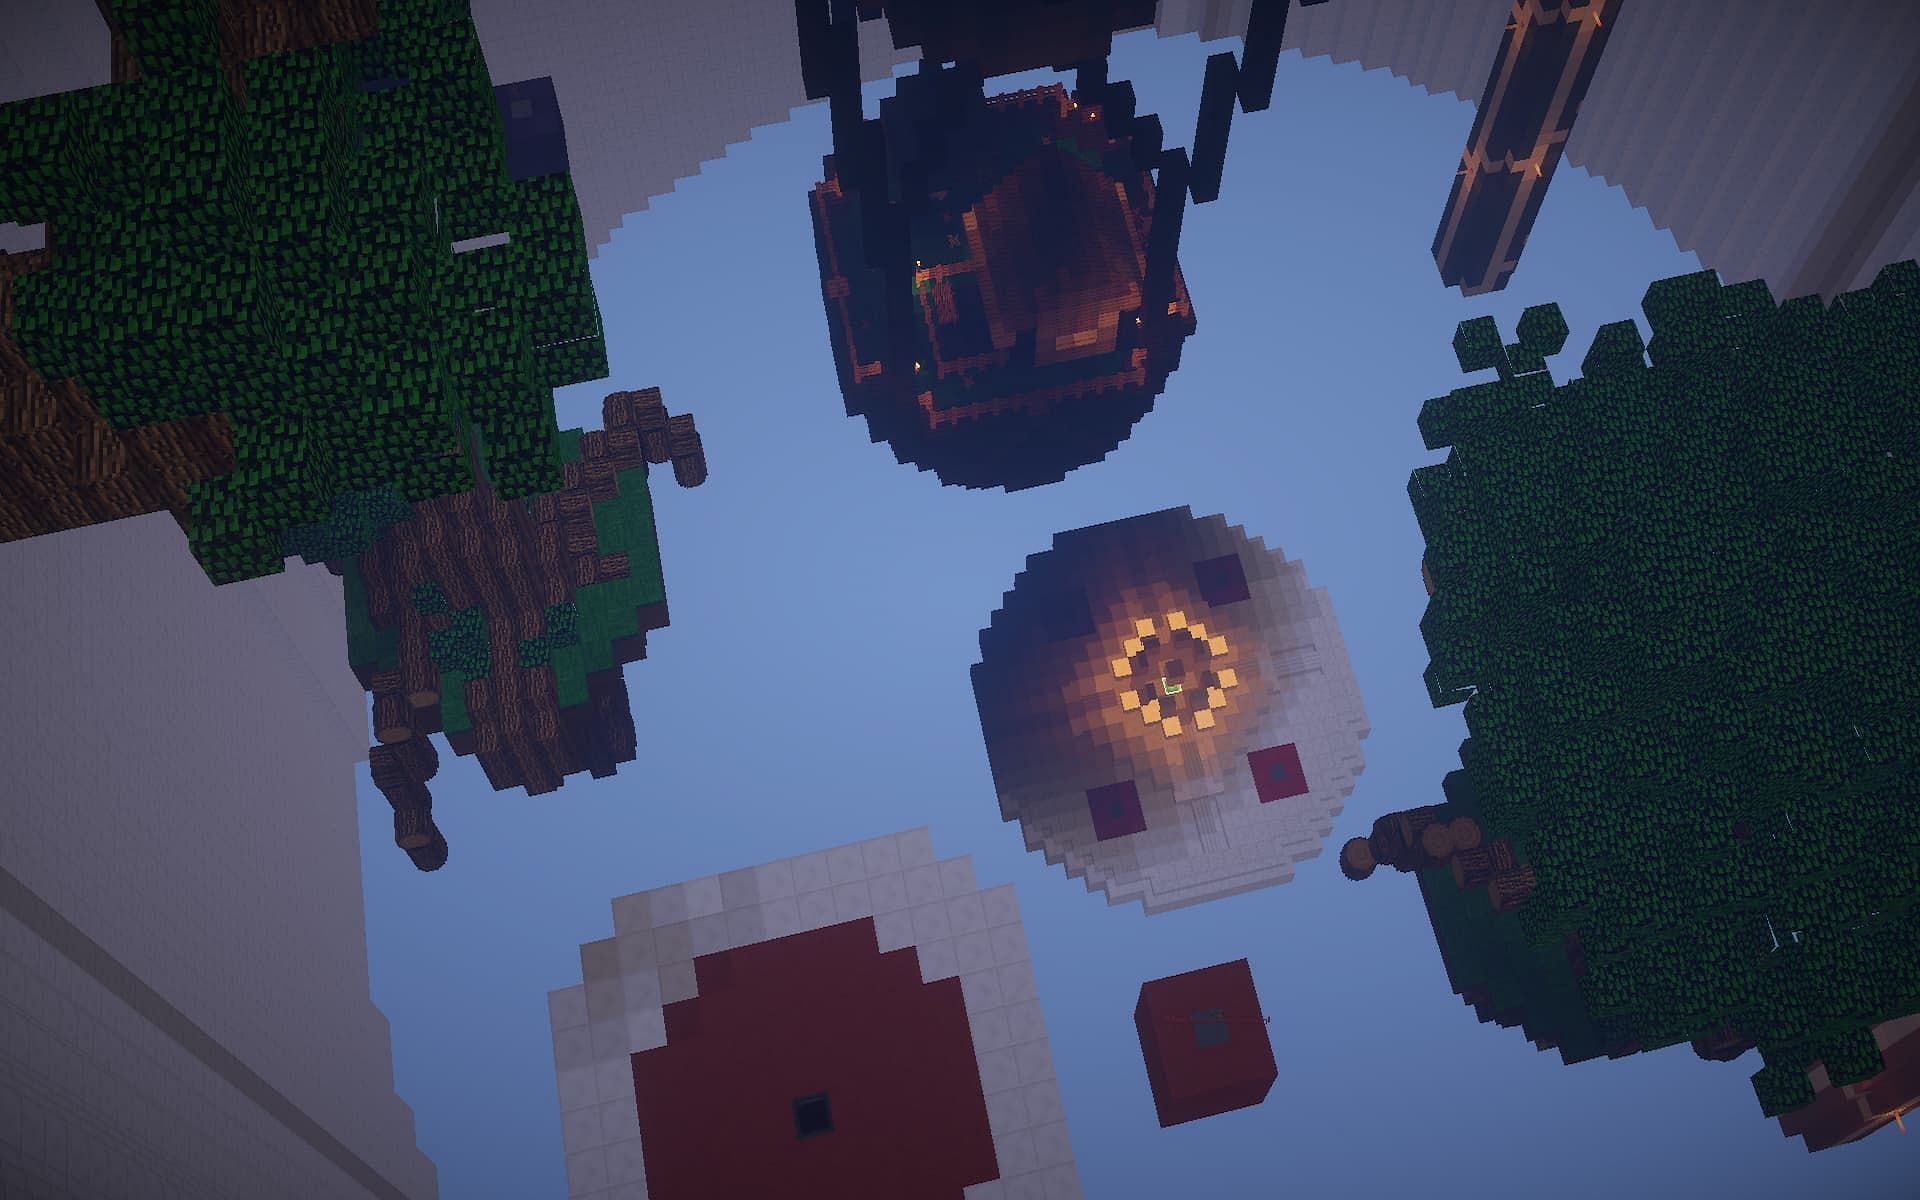 Bring your A-game for this fast-paced PvP map (Image via Minecraftmaps.com)